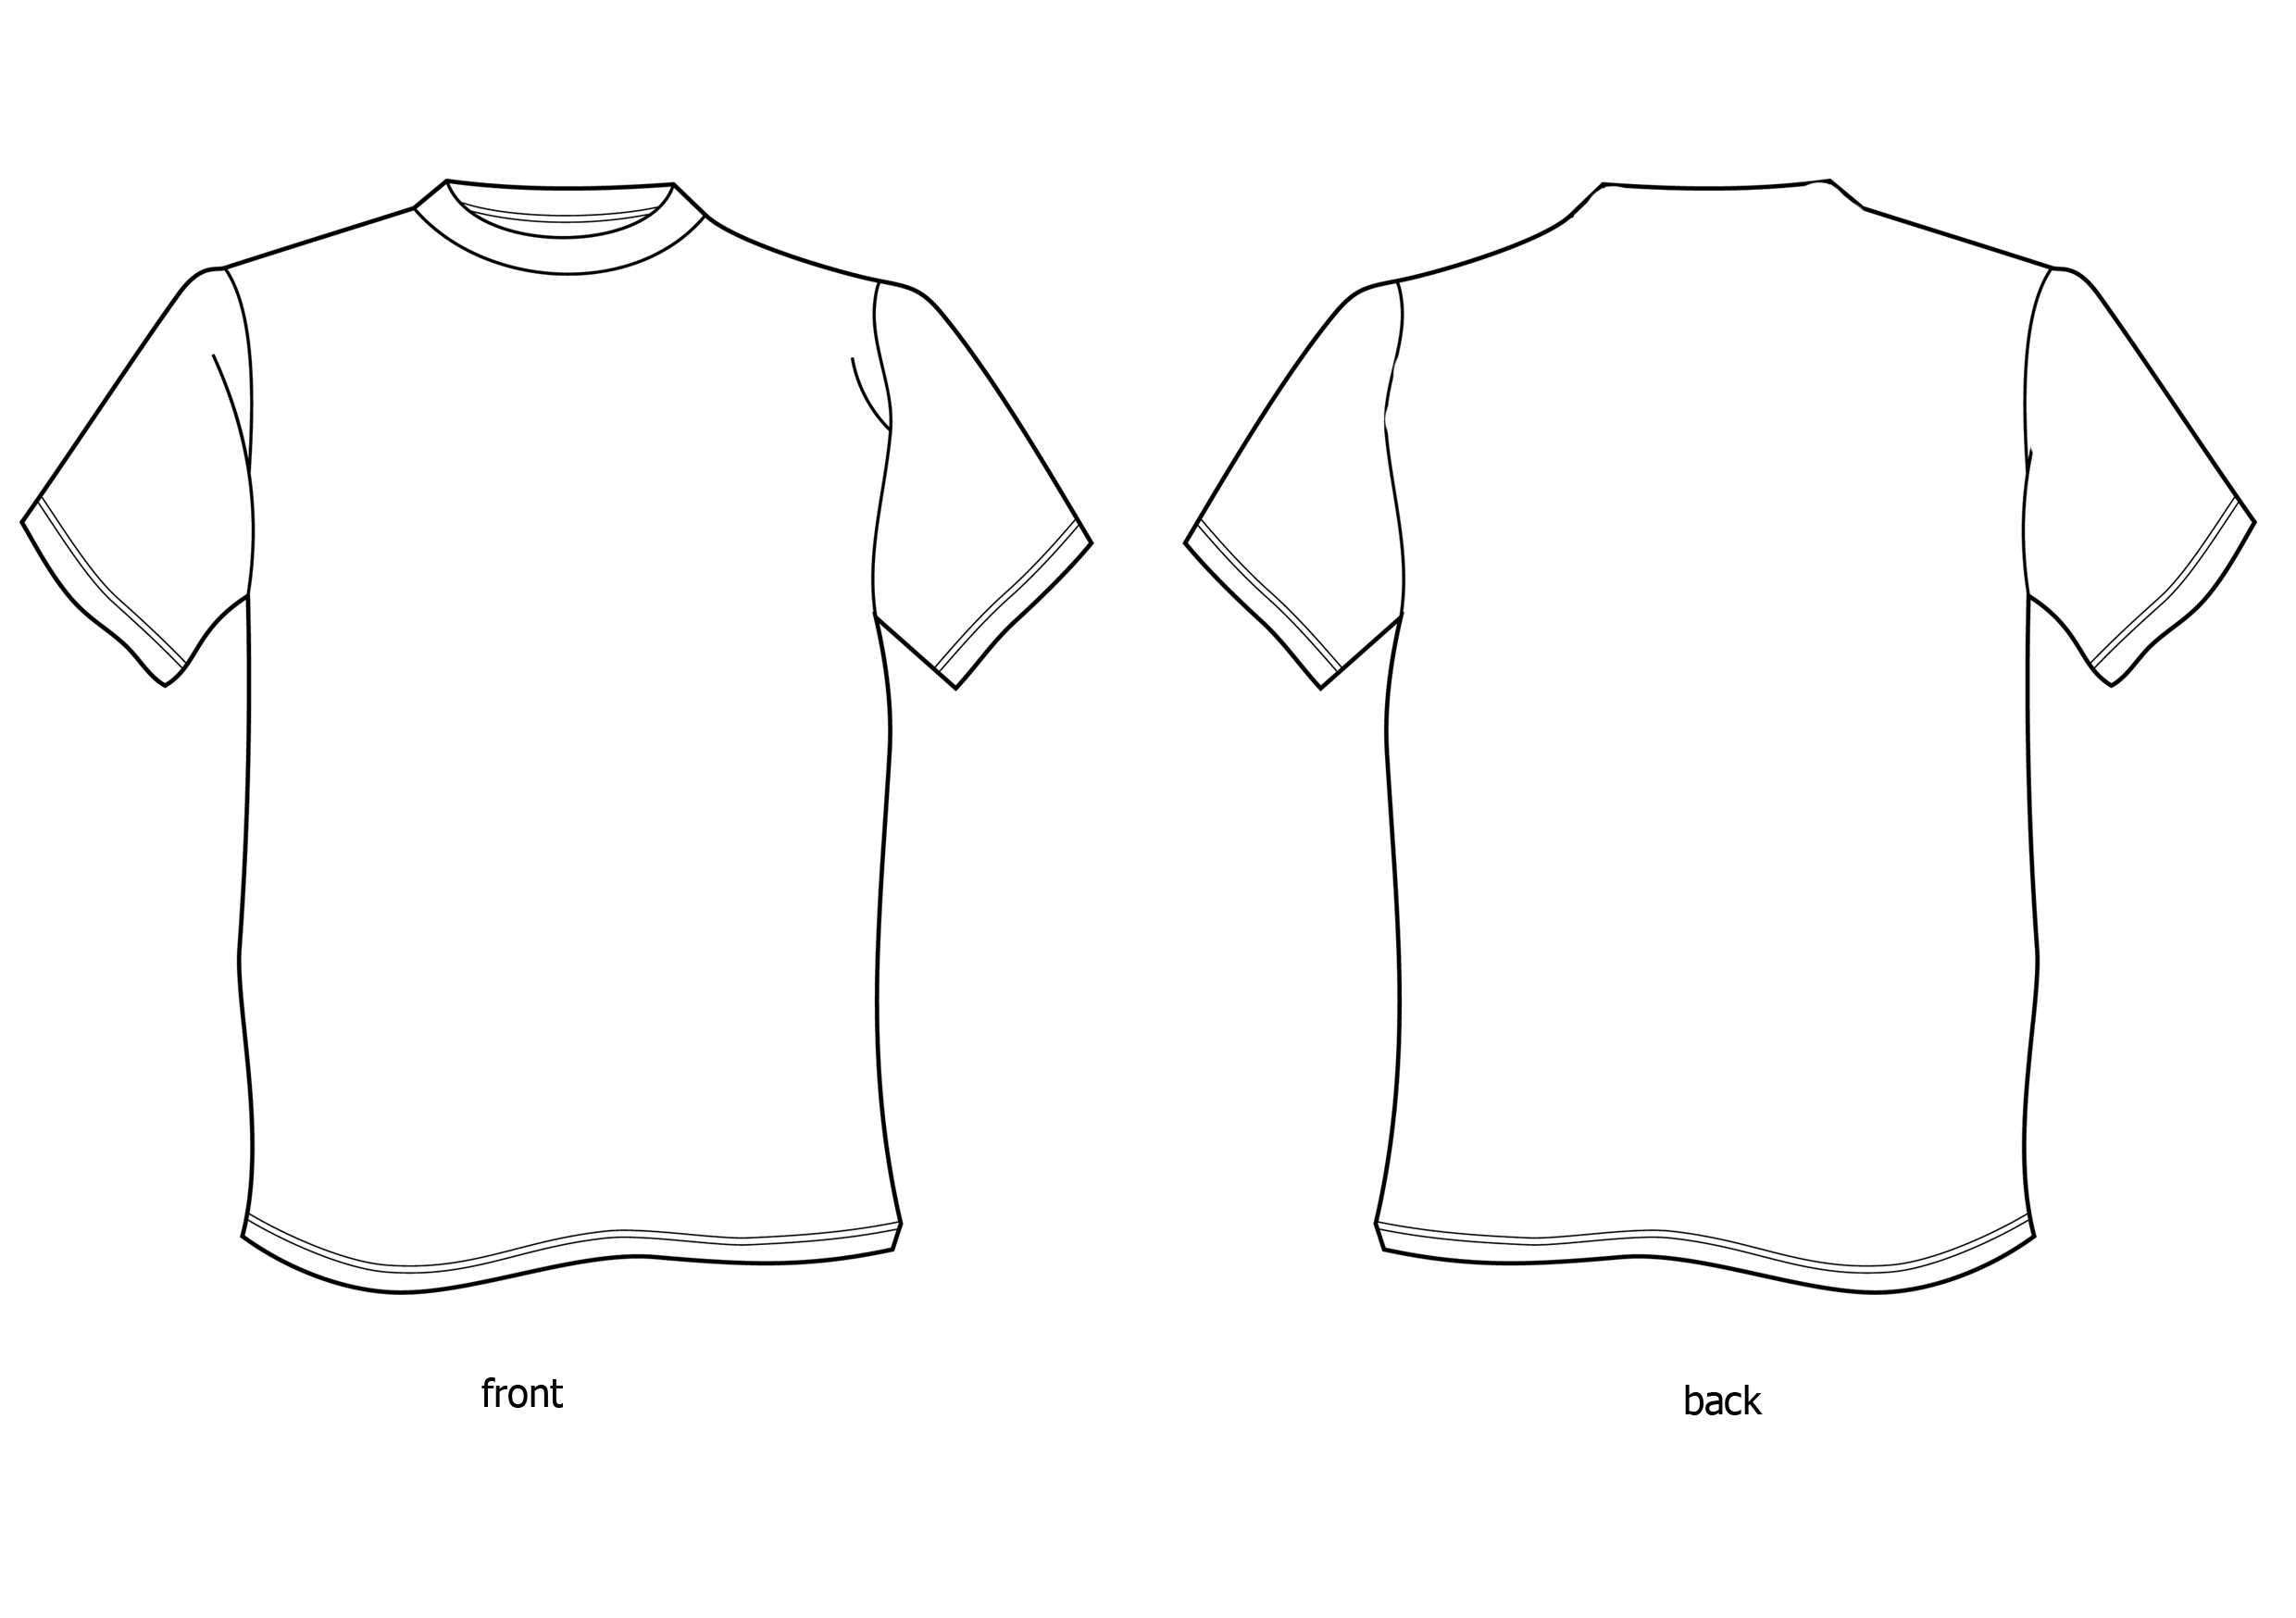 Free T Shirt Design Template, Download Free Clip Art, Free Pertaining To Blank T Shirt Design Template Psd